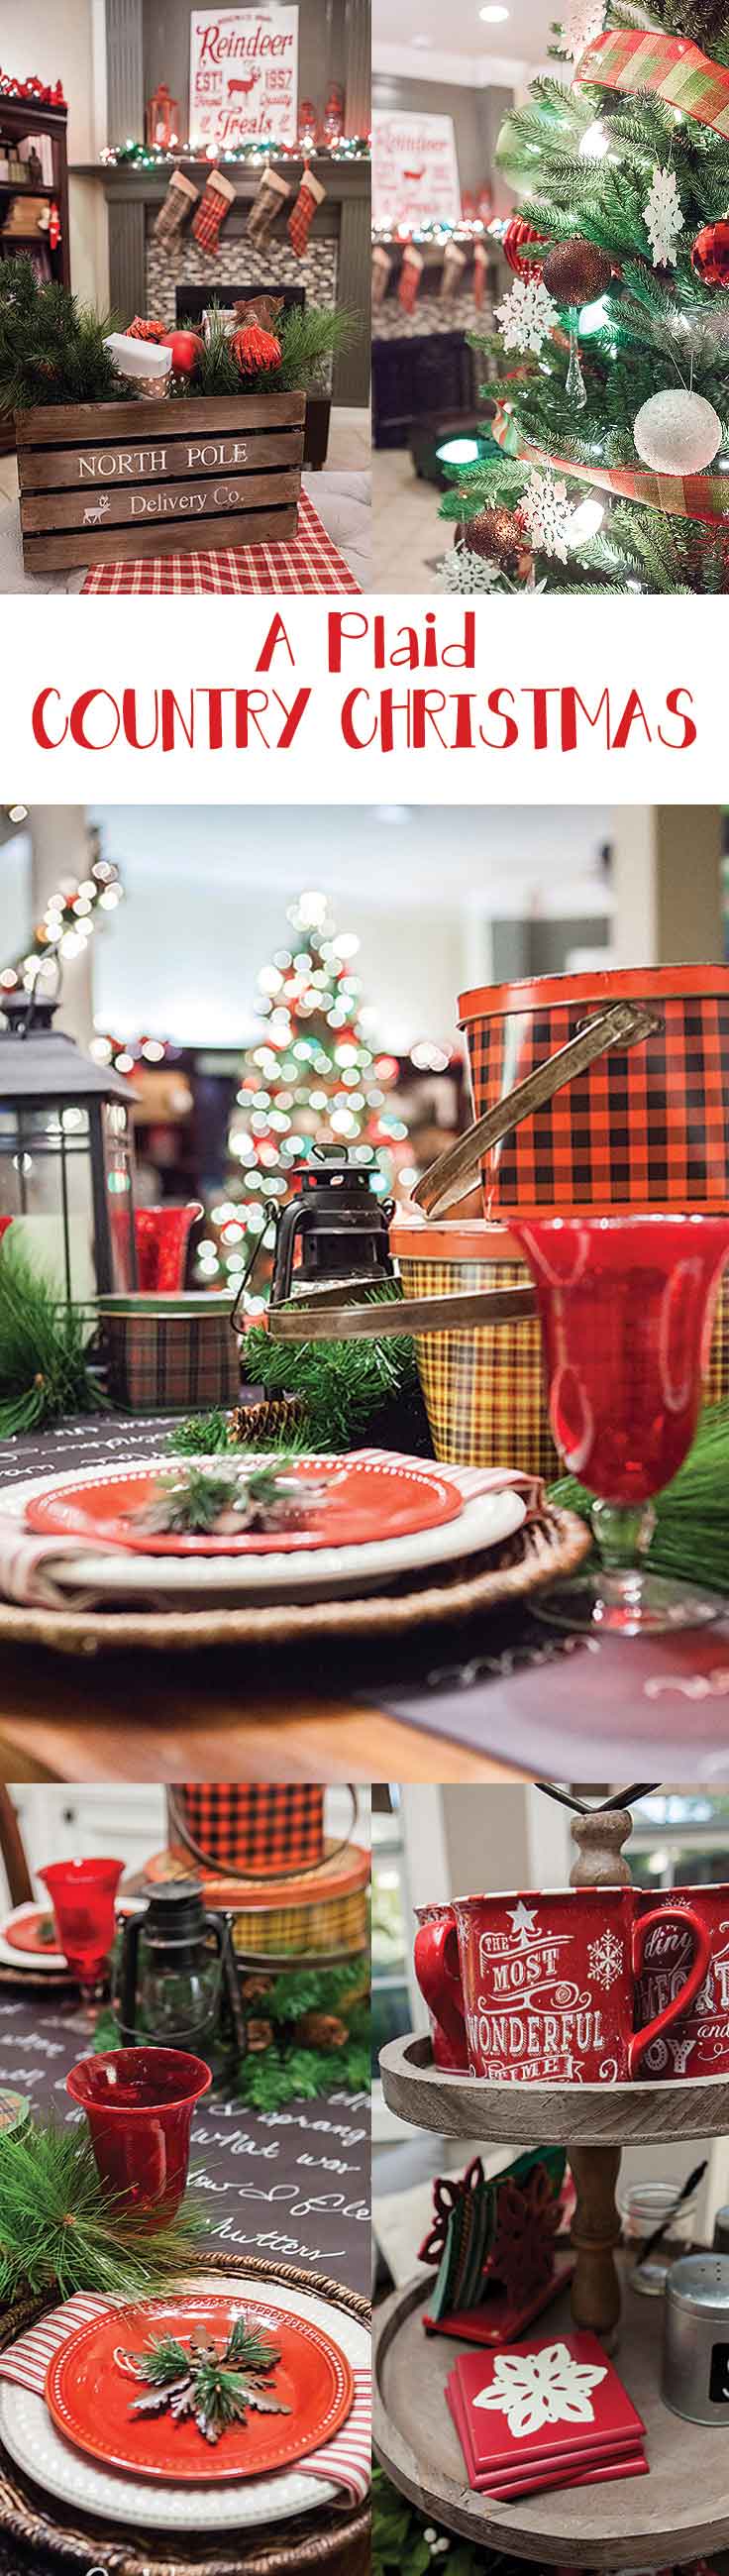 A truly stunning Christmas Home Tour as part of the Christmas in the Country Blog Tour. This Plaid Inspired Country Christmas will knock your socks off. Features tours of the Living room, Dining Room and a Cocoa hot chocolate bar in the Breakfast room. There is so much inspiration for Christmas decorations in this one post. Be prepared to feel like you are cuddled up by the fire in a warm Northwoods comfy cottage! #country #Christmas #Plaid #Holidaydecorating #Holiday ideas #Holidays via @mrsmajorhoff